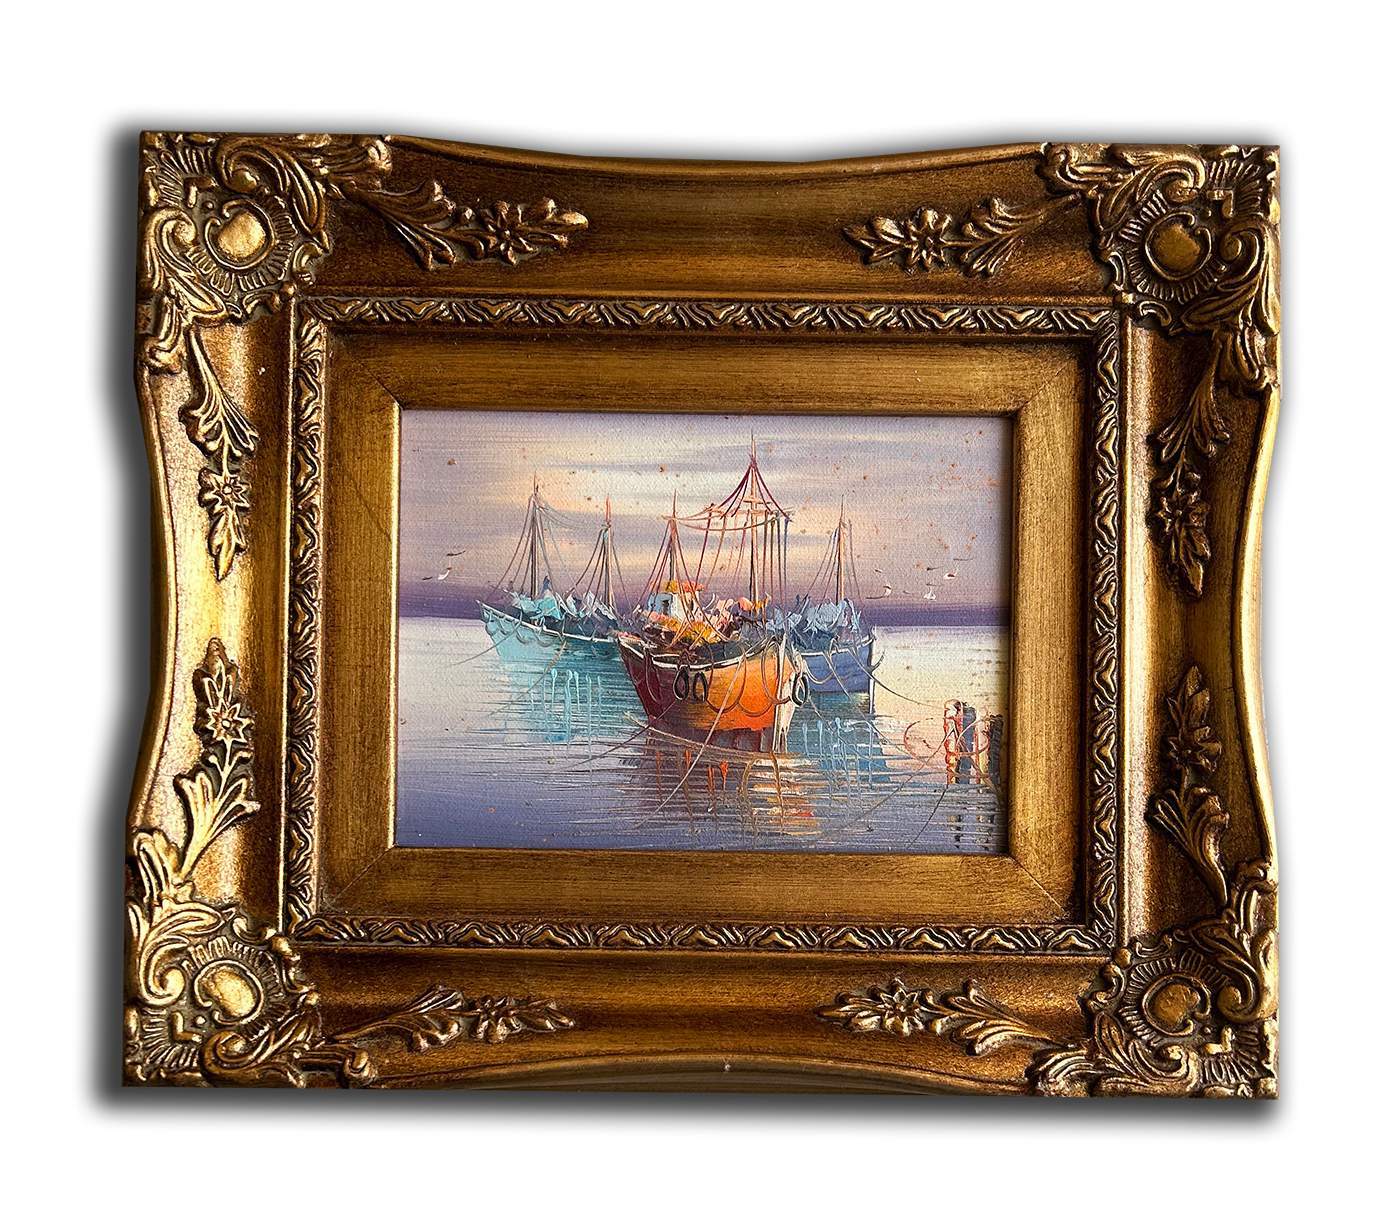 Sailing and venice, hand-painted 20x25 cm eller 8x10 ins